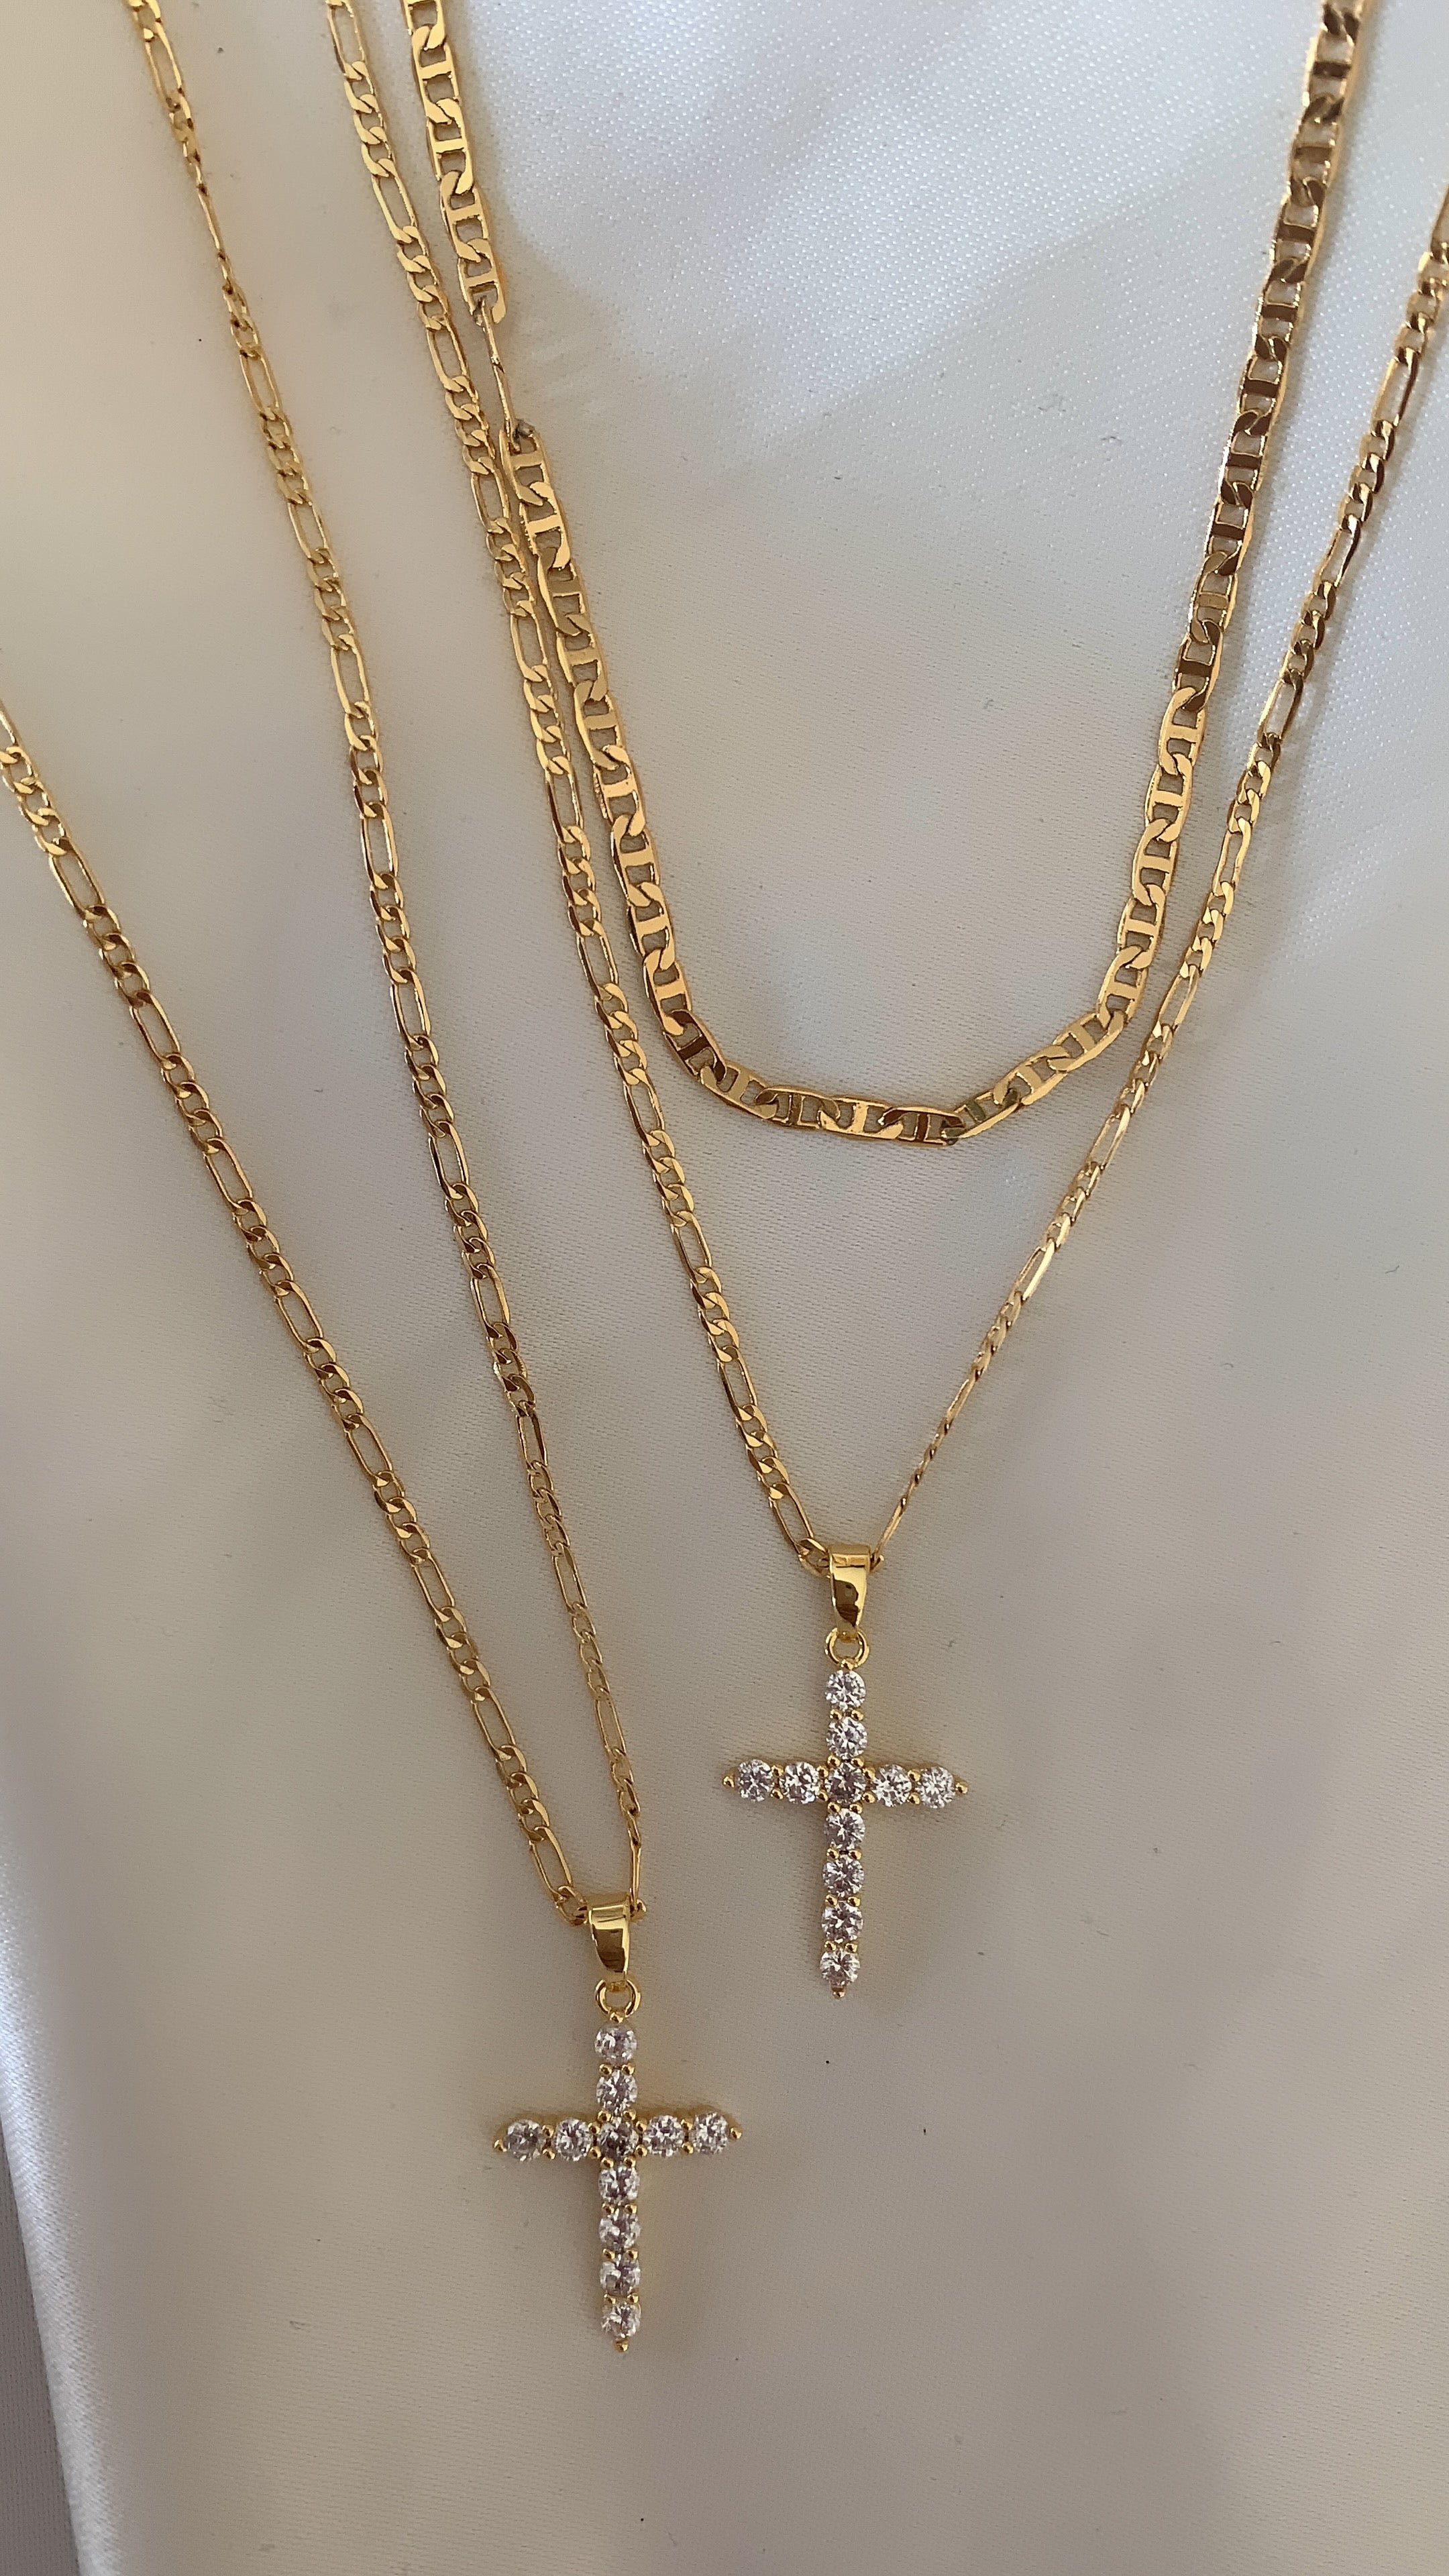 “ily” gold filled cross necklace